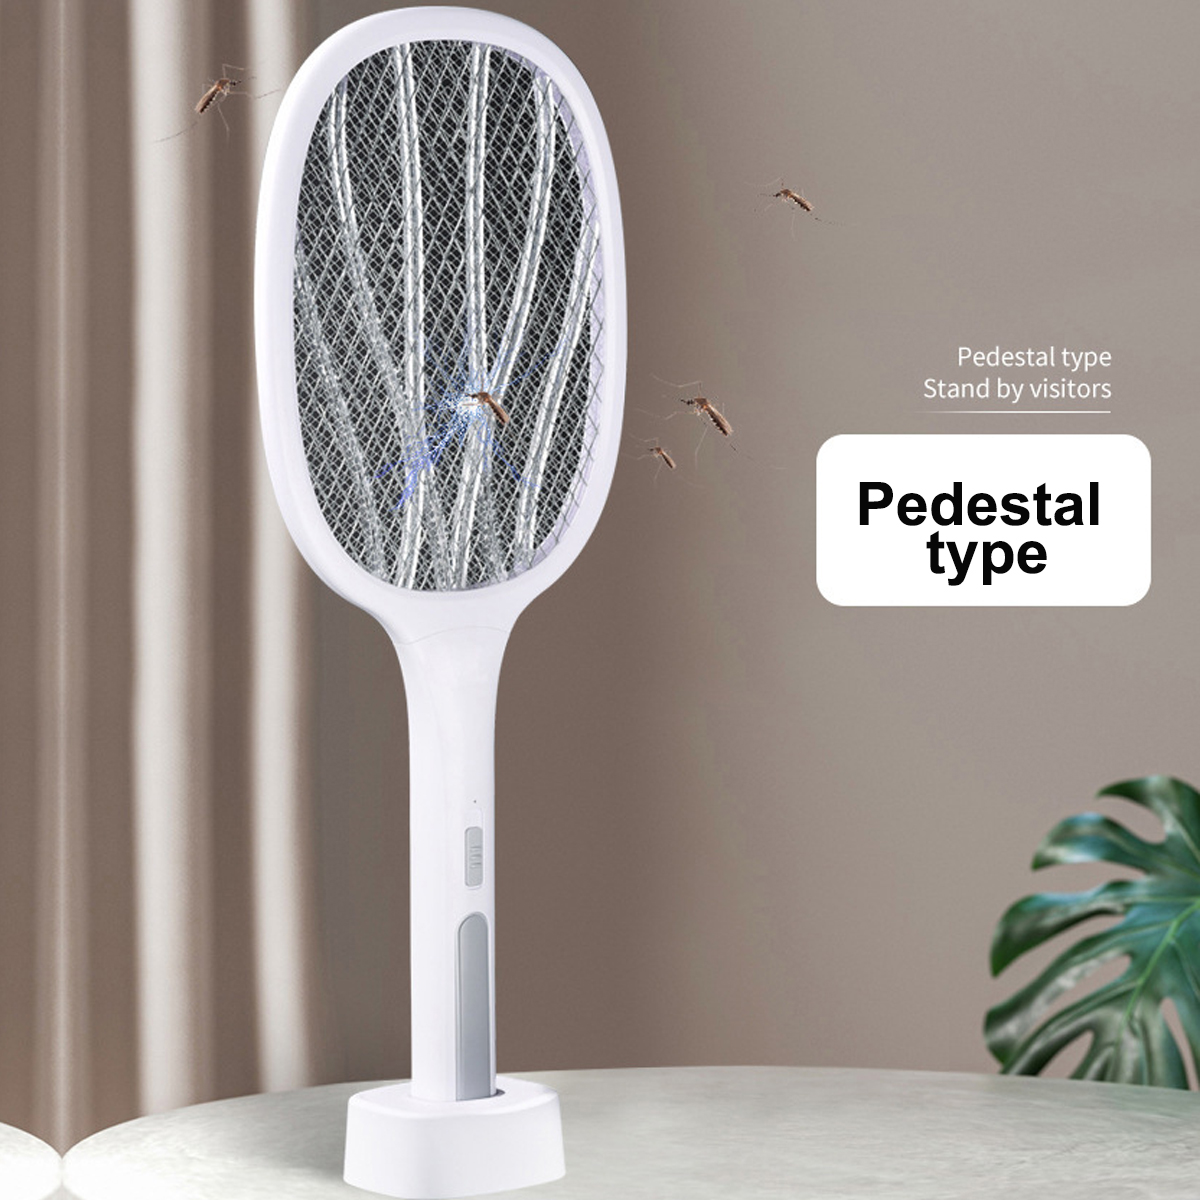 106LED-Electric-Flies-Mosquito-Swatter-3000V-Anti-Mosquito-Fly-Bug-Zapper-Racket-Rechargeable-Summer-1883413-10